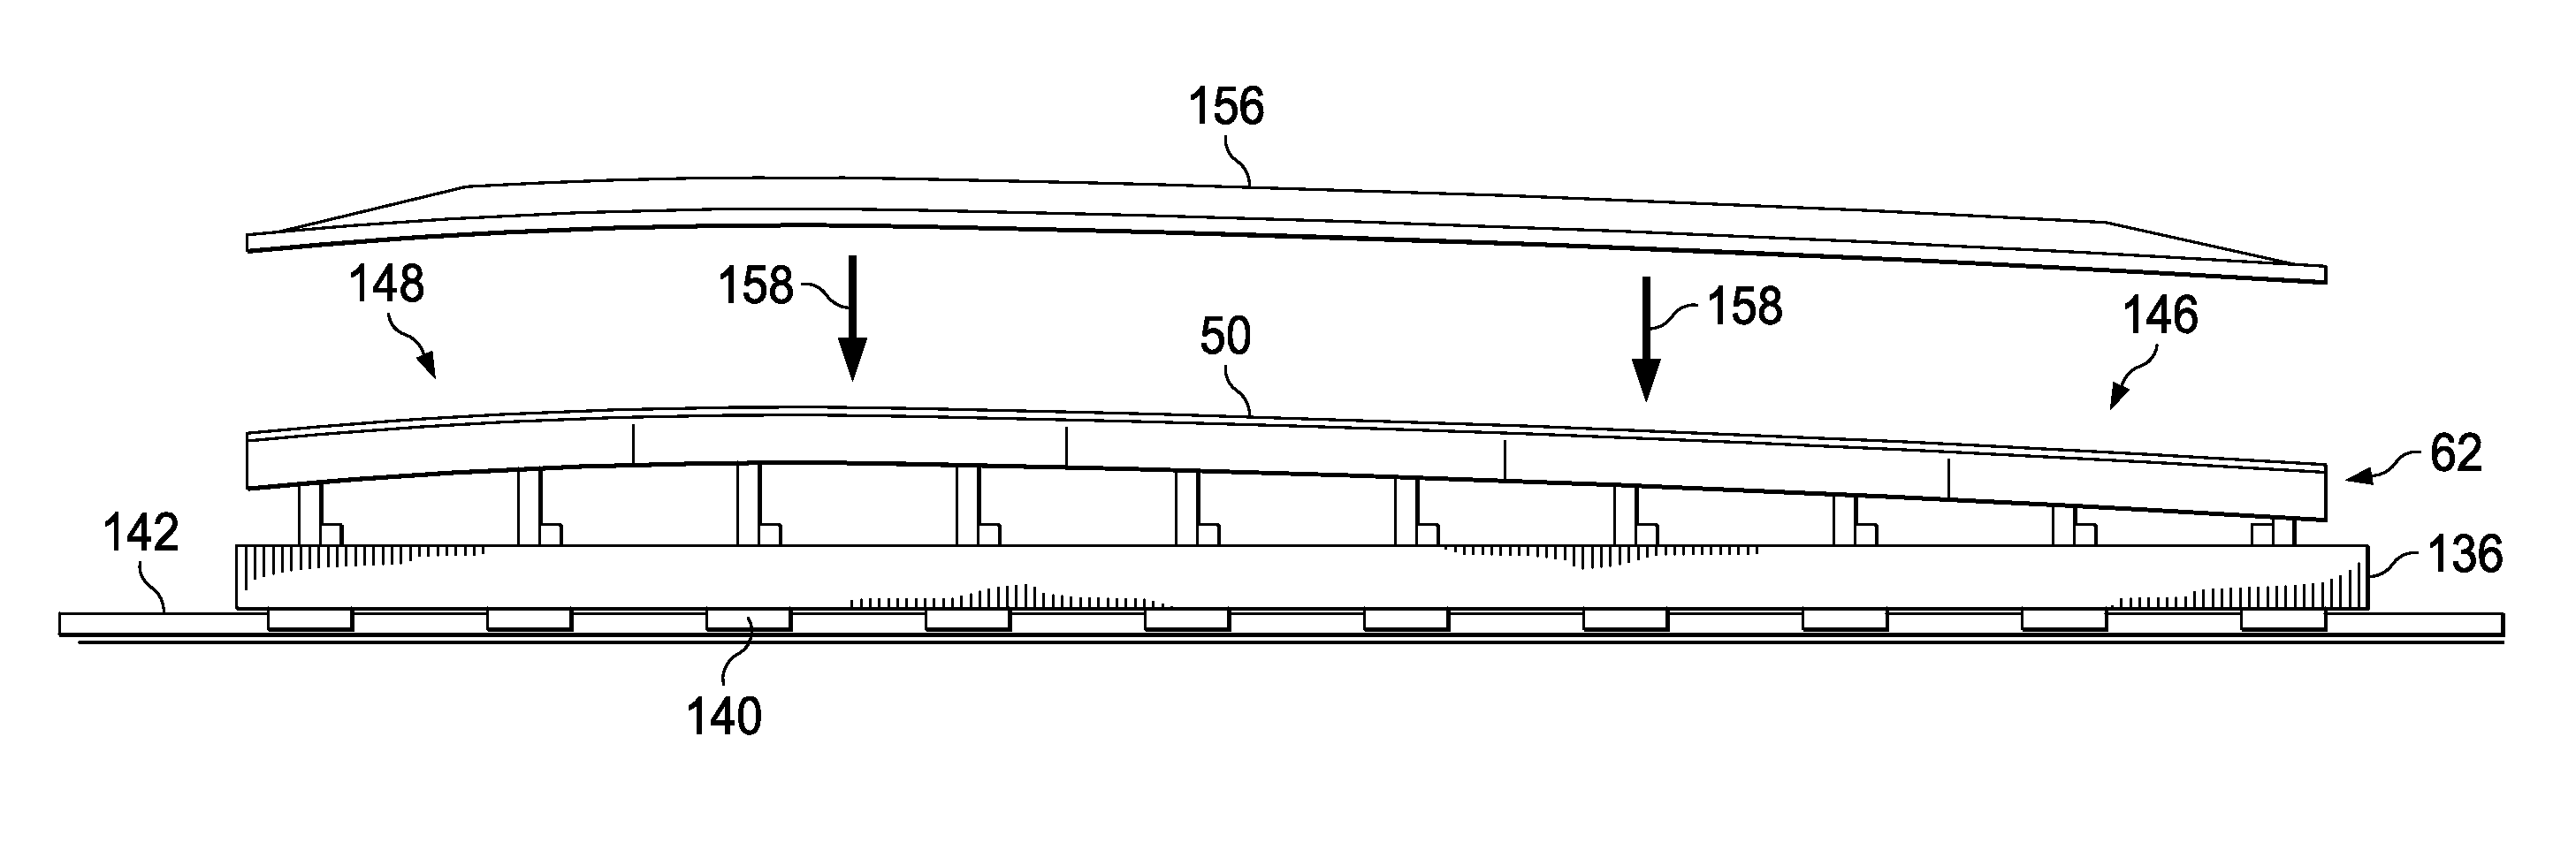 Fabrication of Stiffened Composite Panels